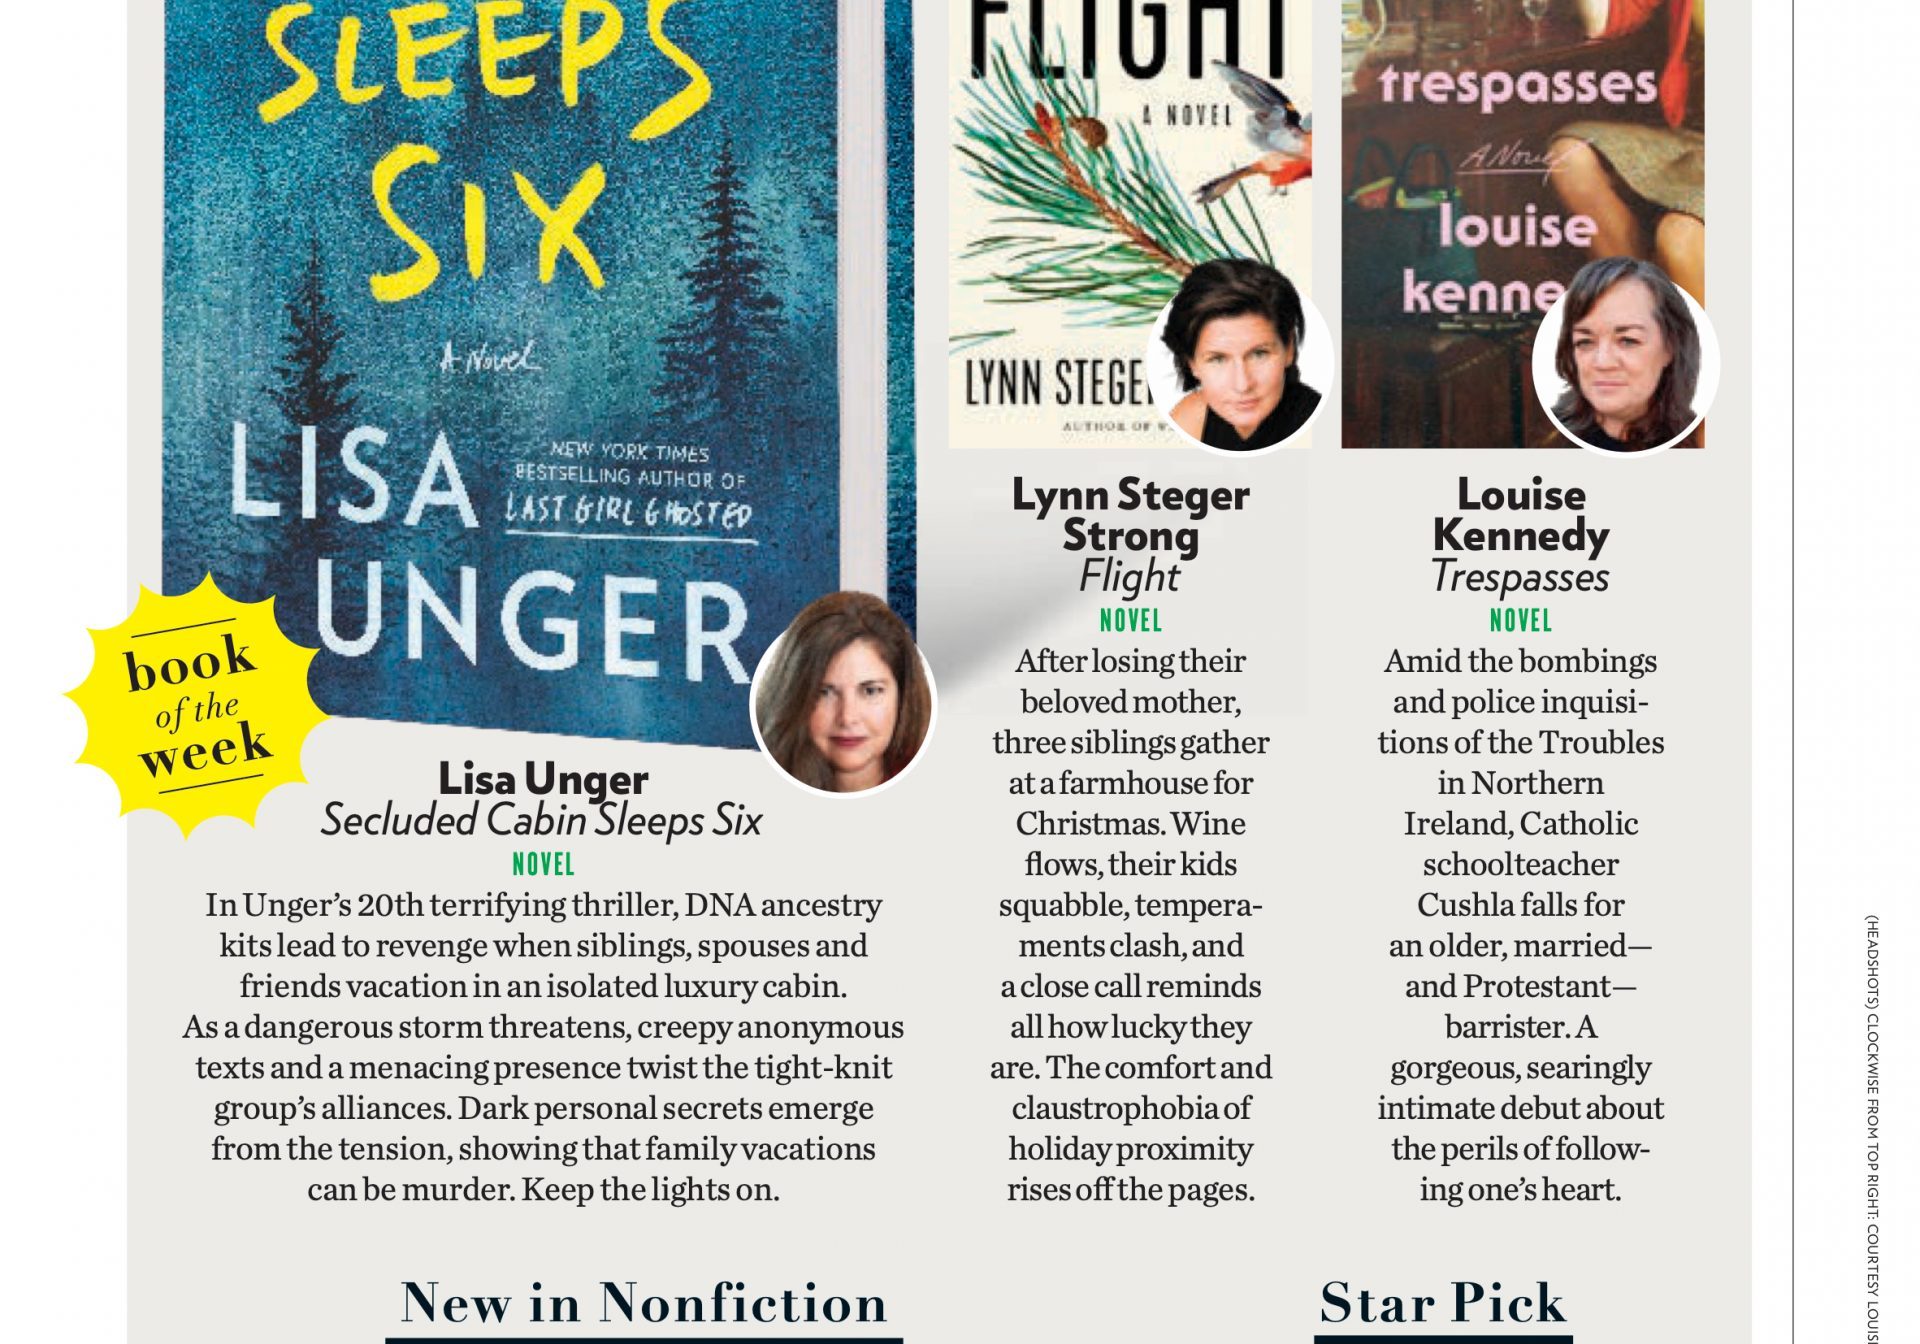 Secluded Cabin Sleeps Six is a People Magazine Book of the Week!